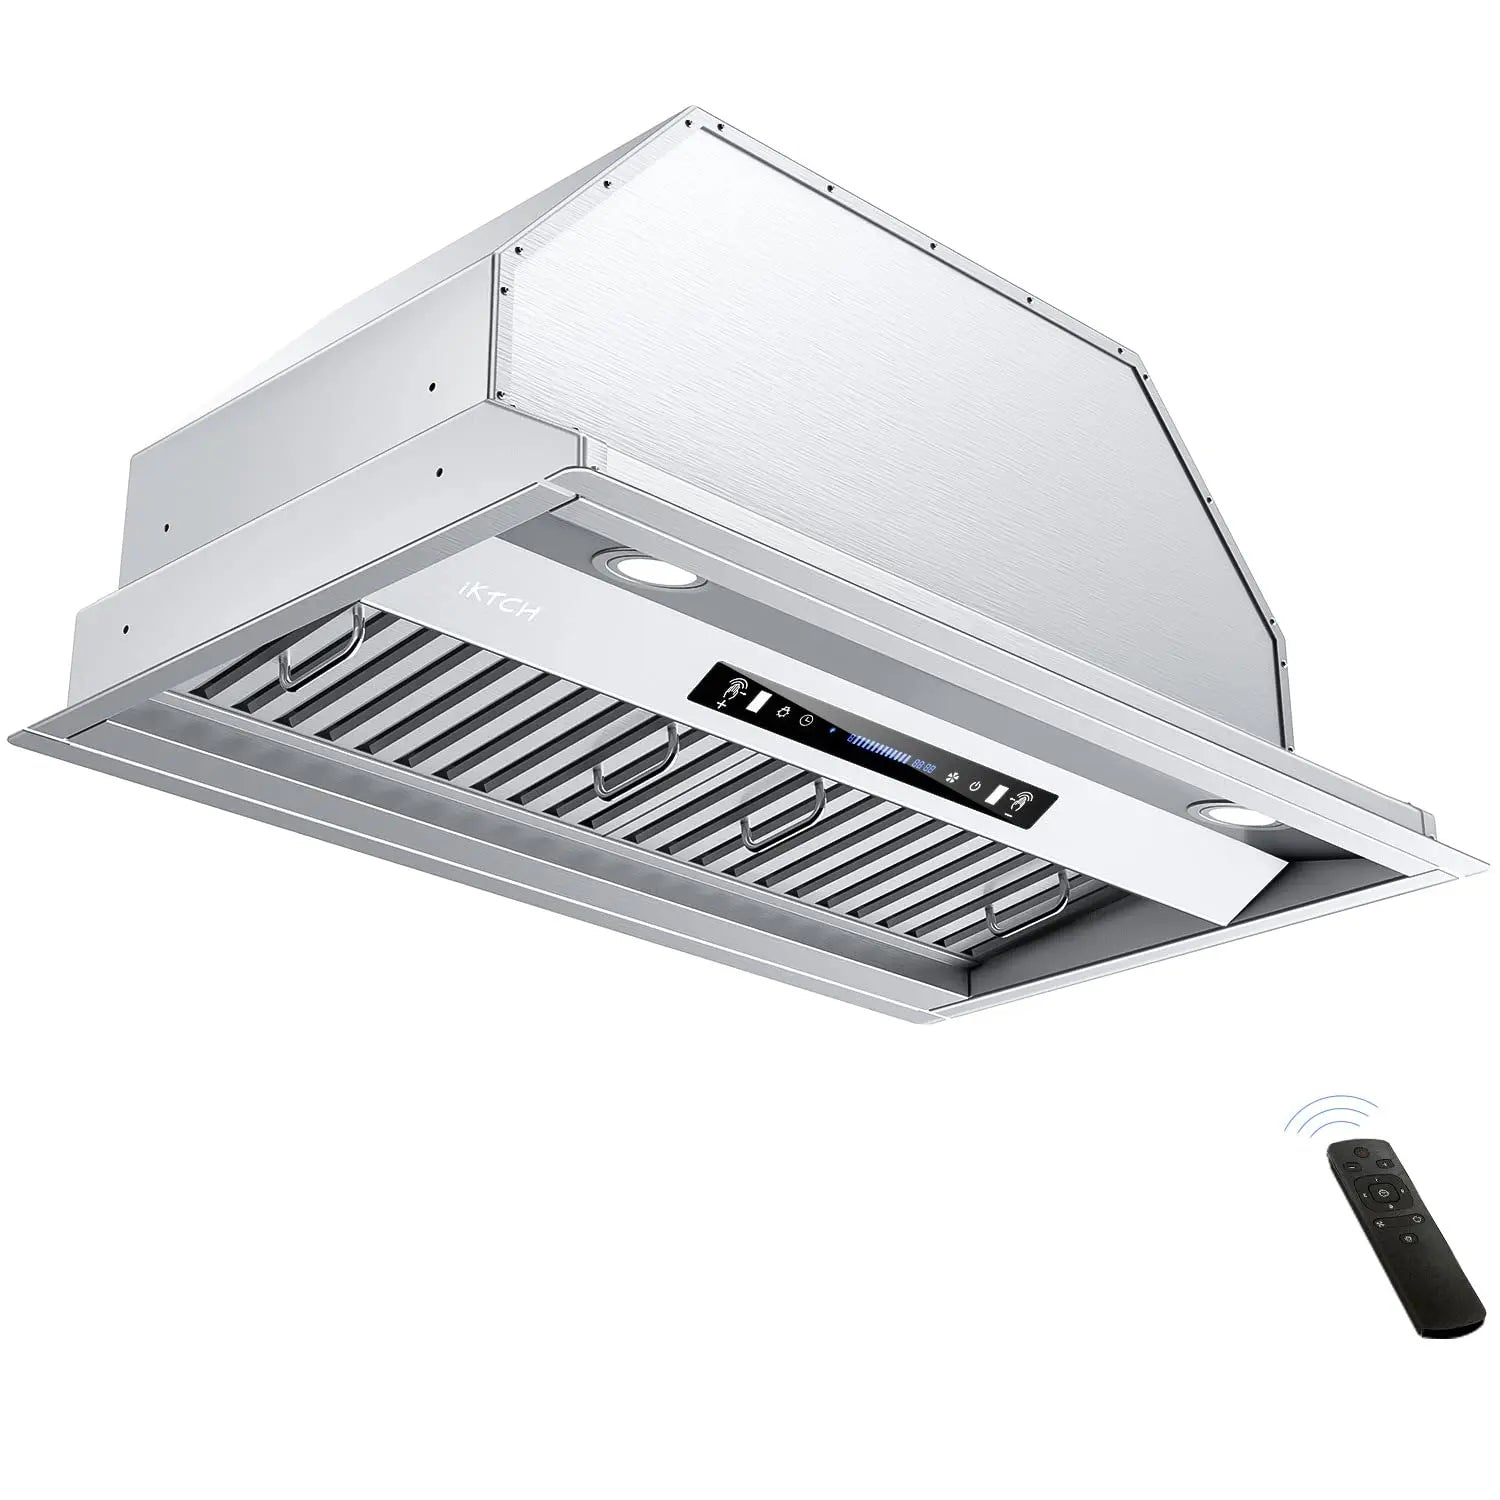 Pacific Side Suction Under Cabinet Ducted Range Hood 36 inch